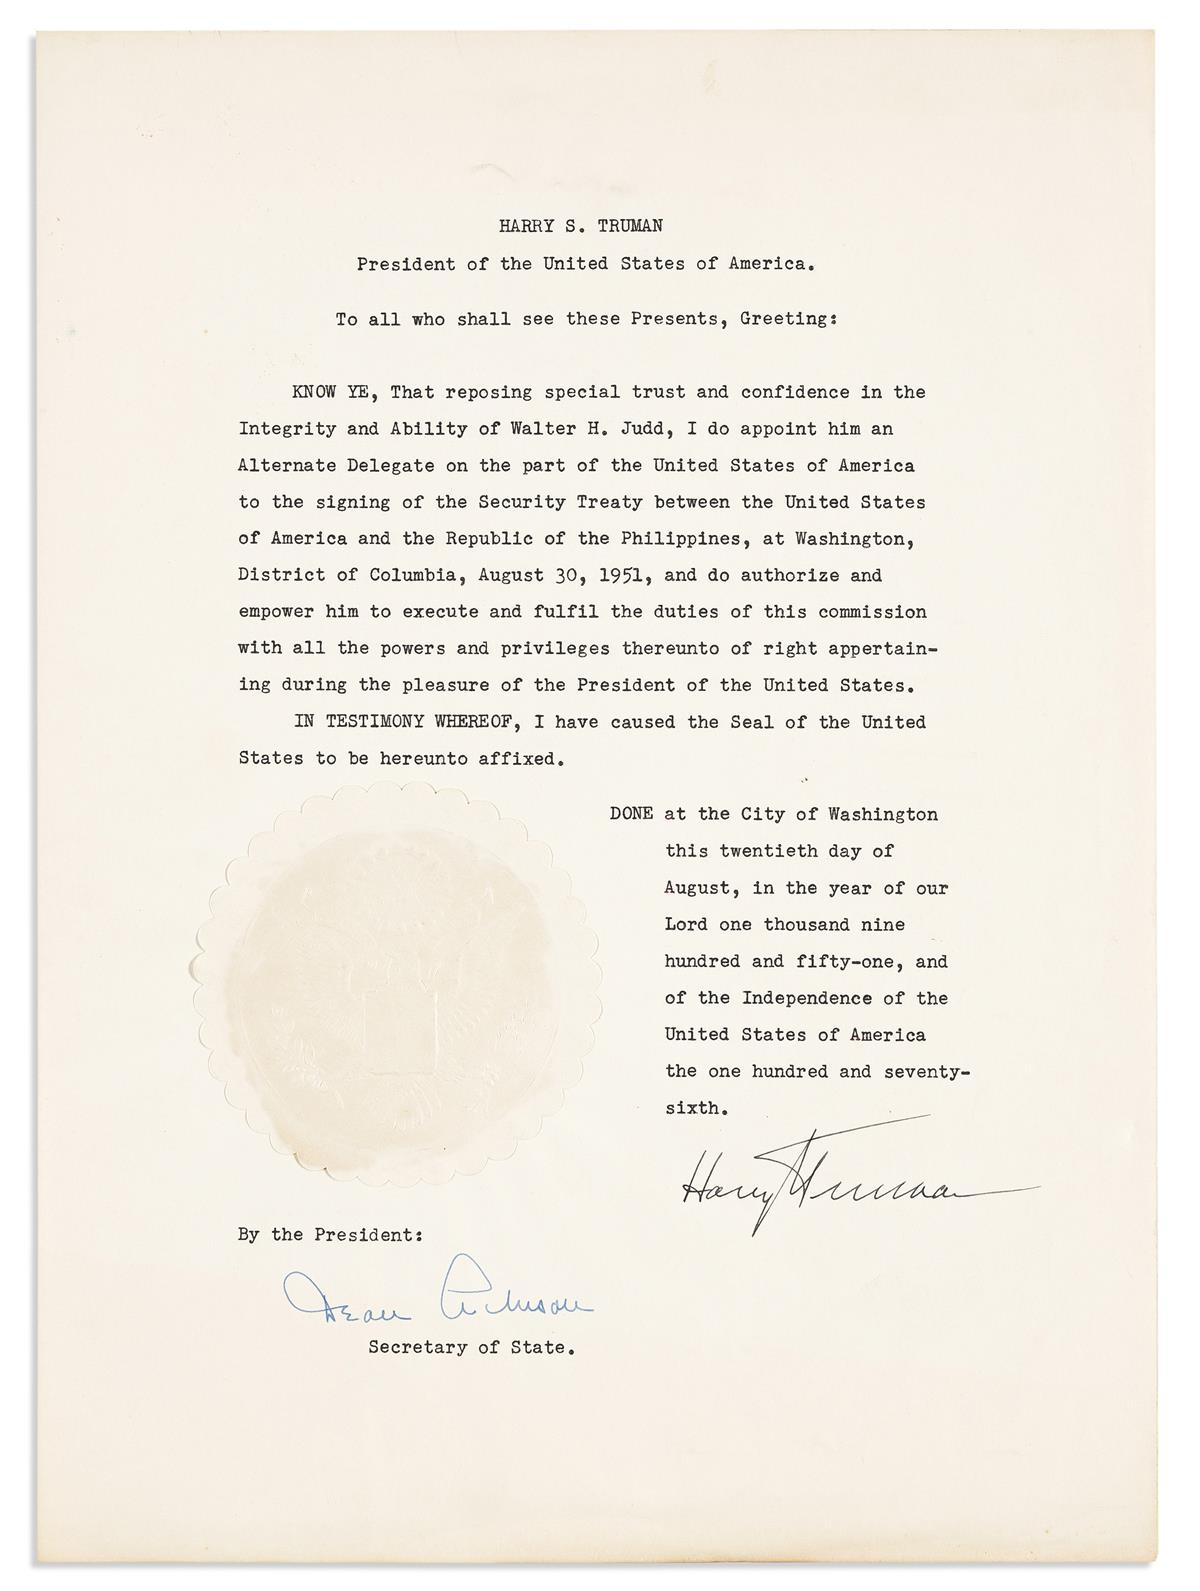 TRUMAN, HARRY S. Two Typed Documents Signed, as President, each appointing Walter H. Judd Alternate Delegate to the signing of a U.S. S